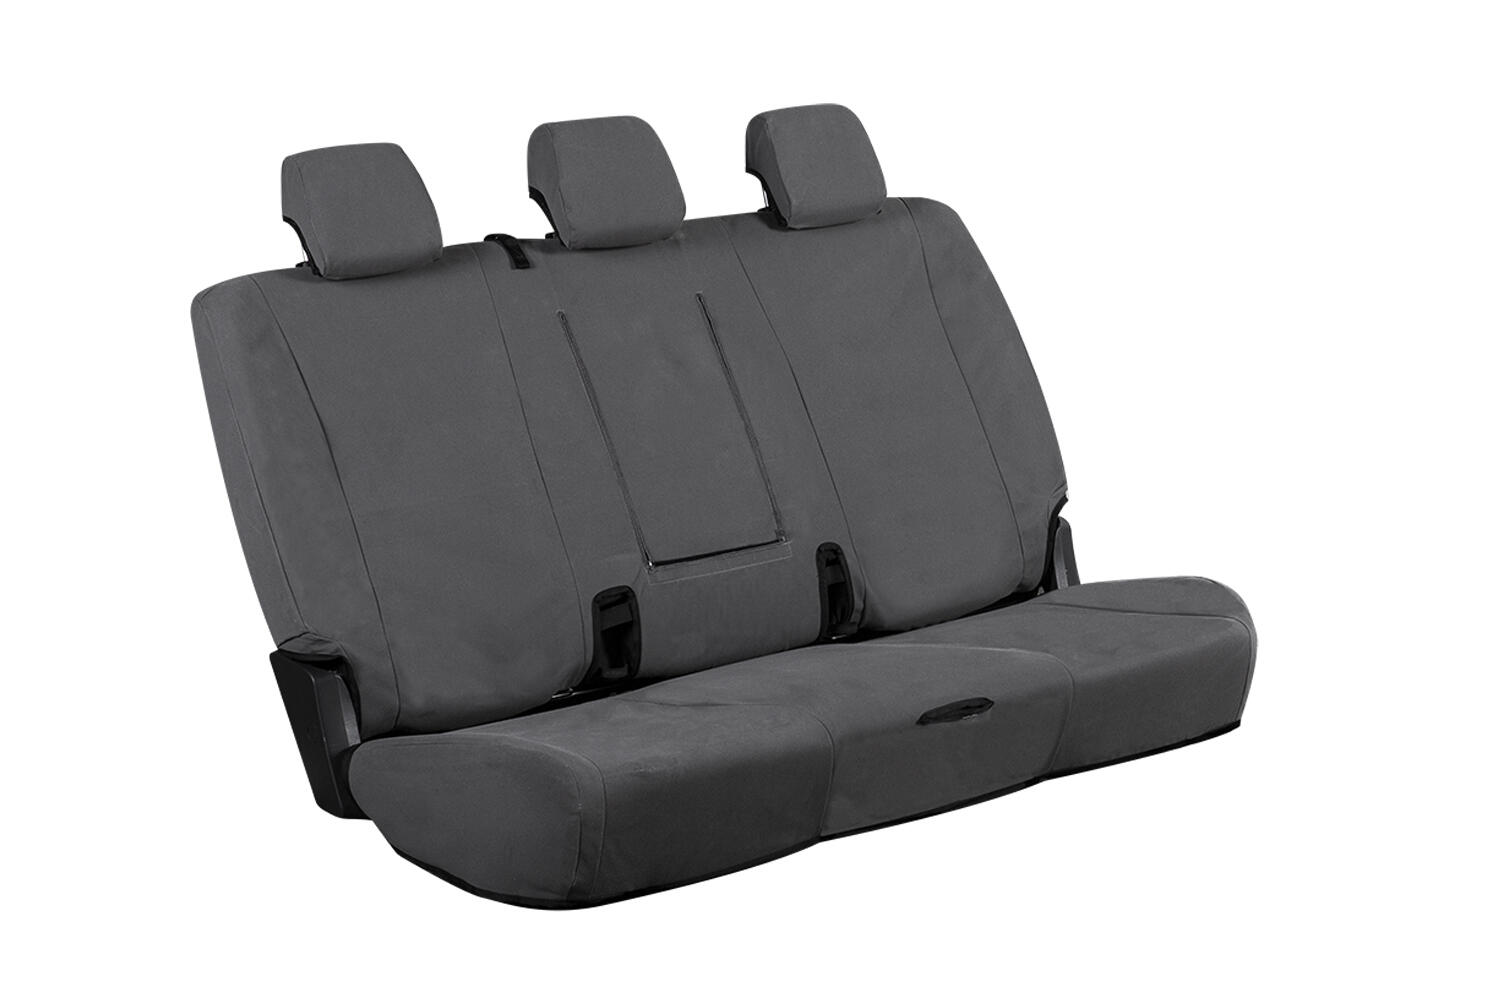 12oz Canvas Seat Covers To Suit Toyota Land Cruiser 70 Series Mwb 1984 1999 Rubber Tree - How To Clean Toyota Canvas Seat Covers